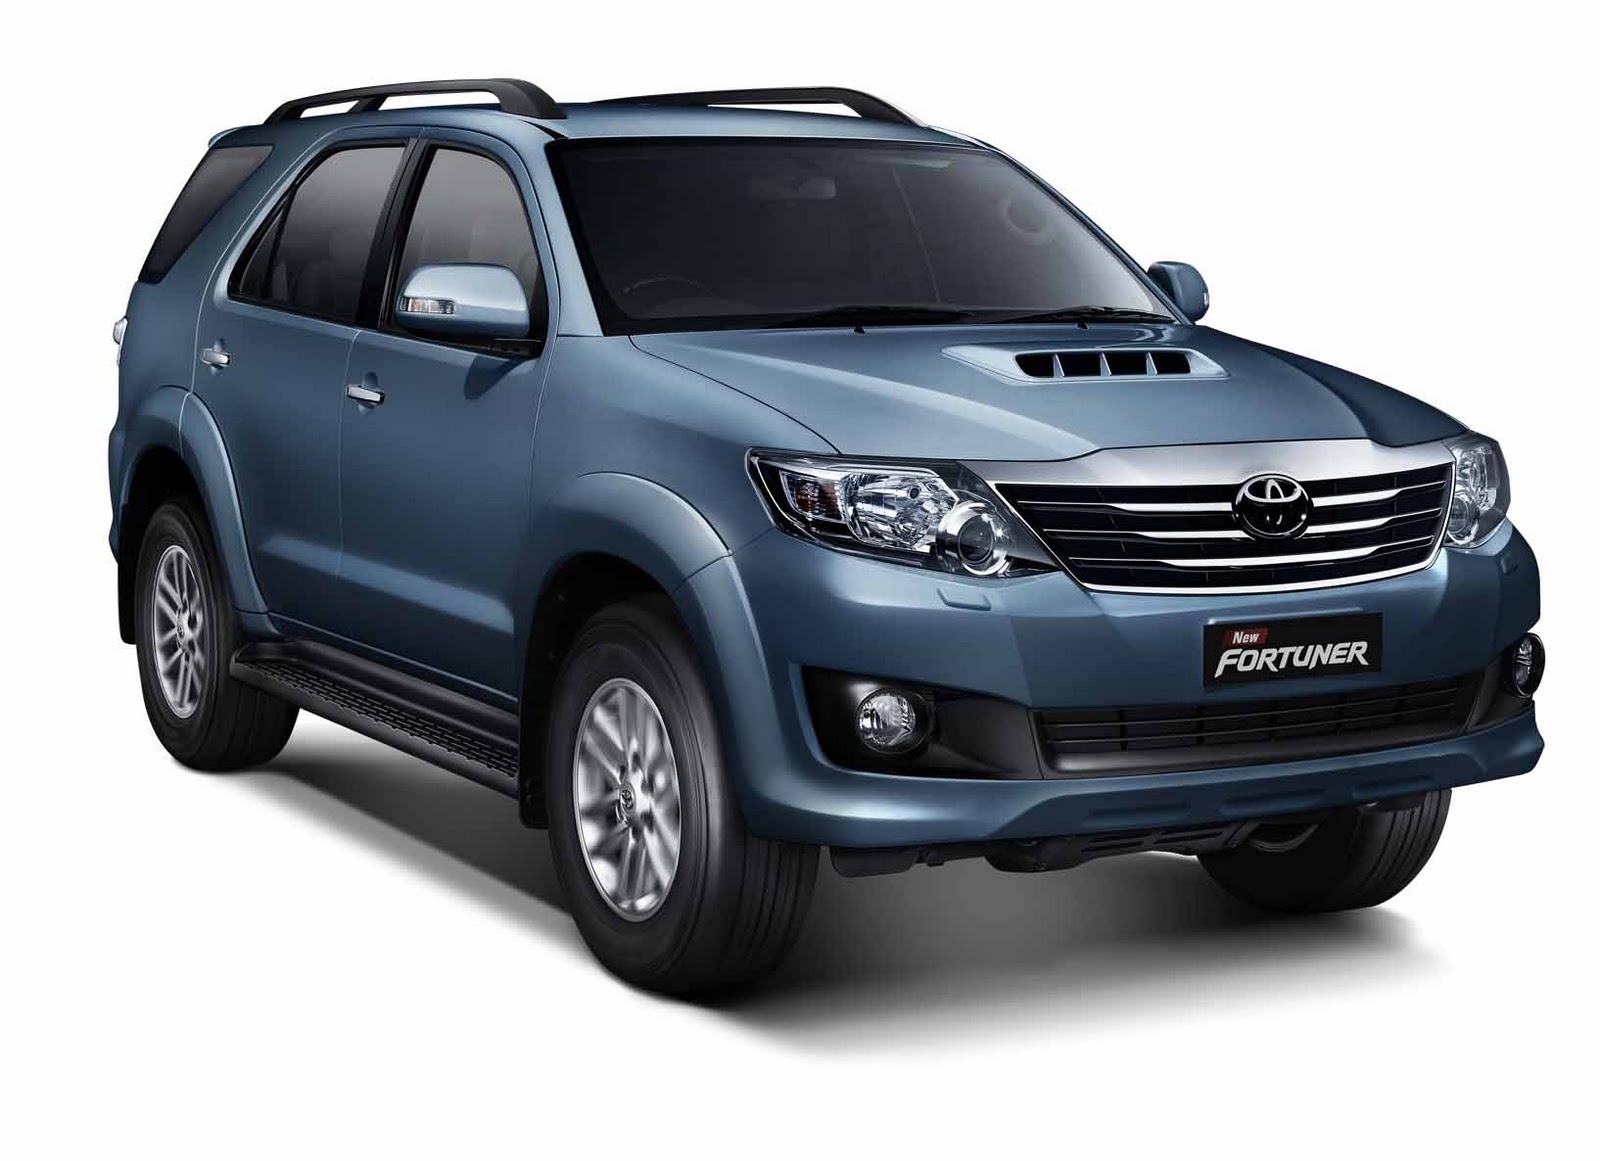 Toyota Fortuner 2WD MT Front Five Doors Picture View